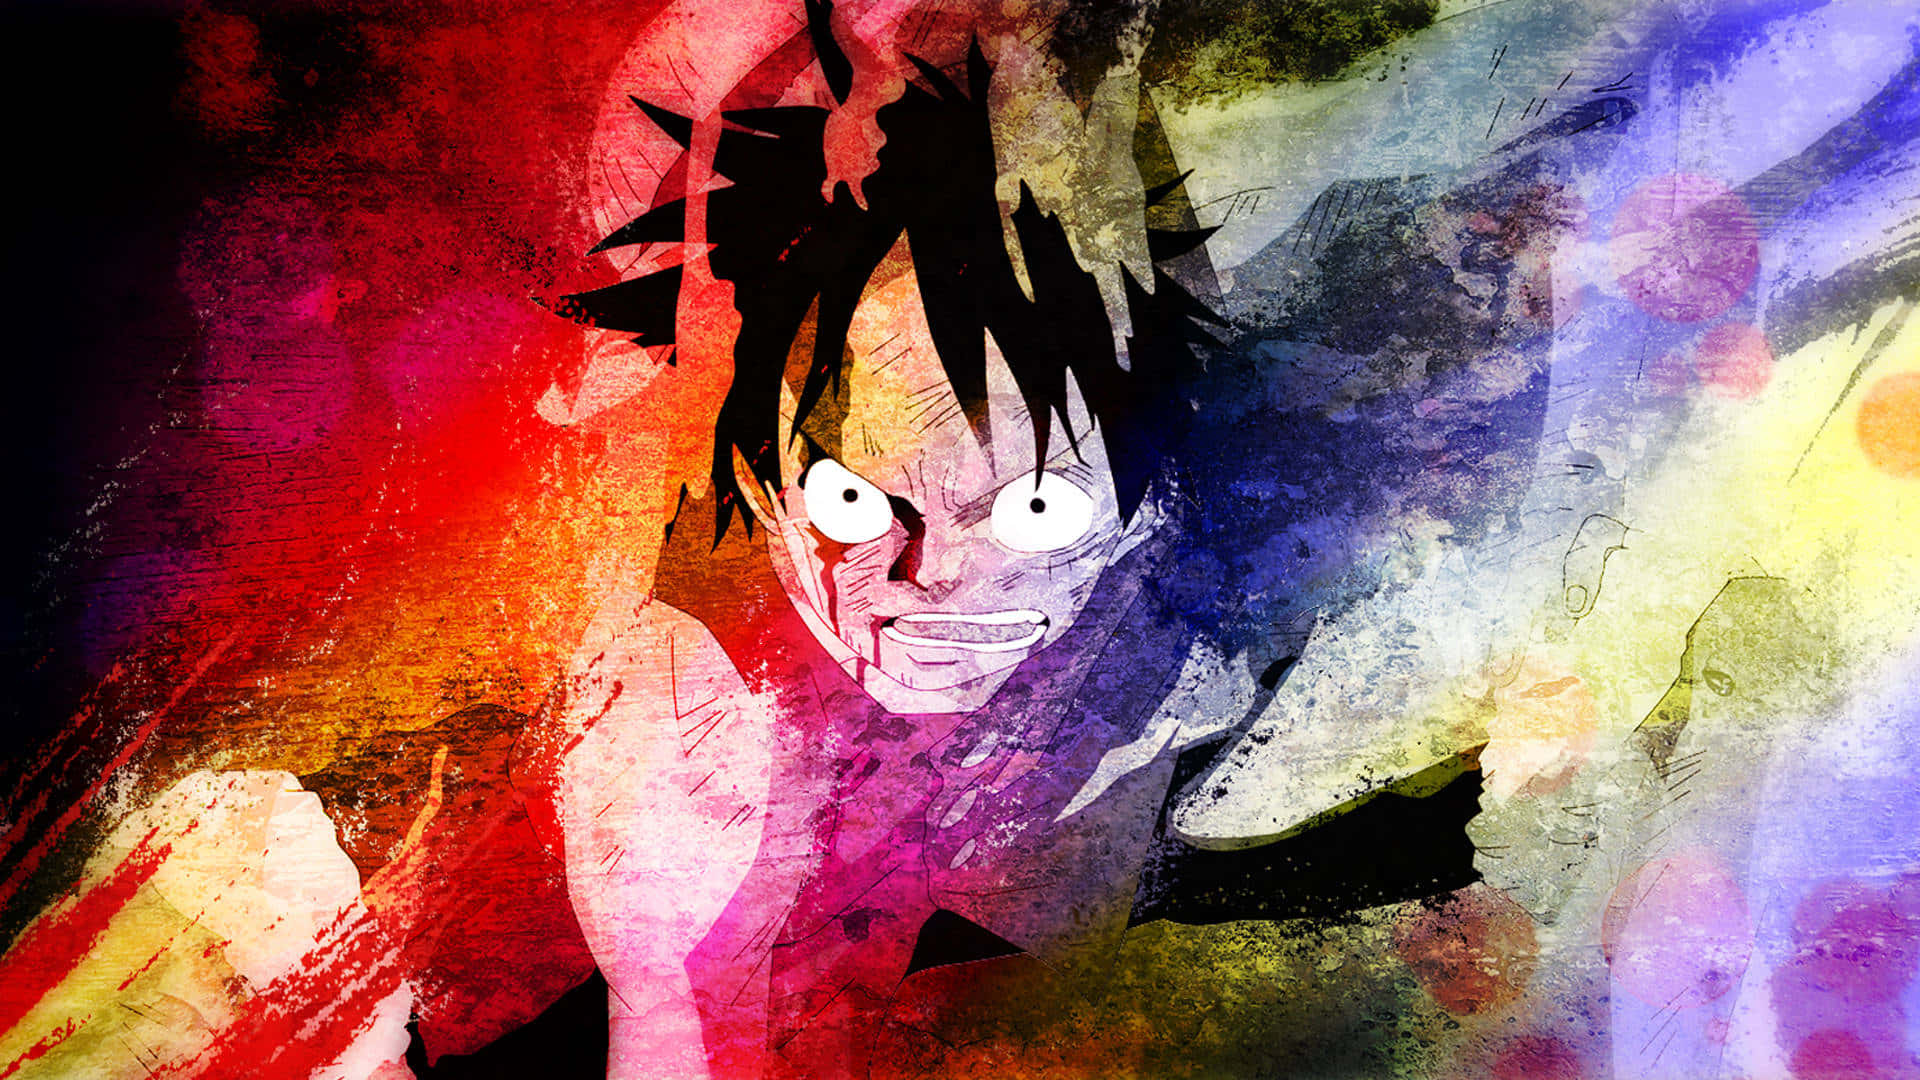 Vibrant Image of Monkey Luffy, The Pirate King - A Colorful Anime depiction Wallpaper